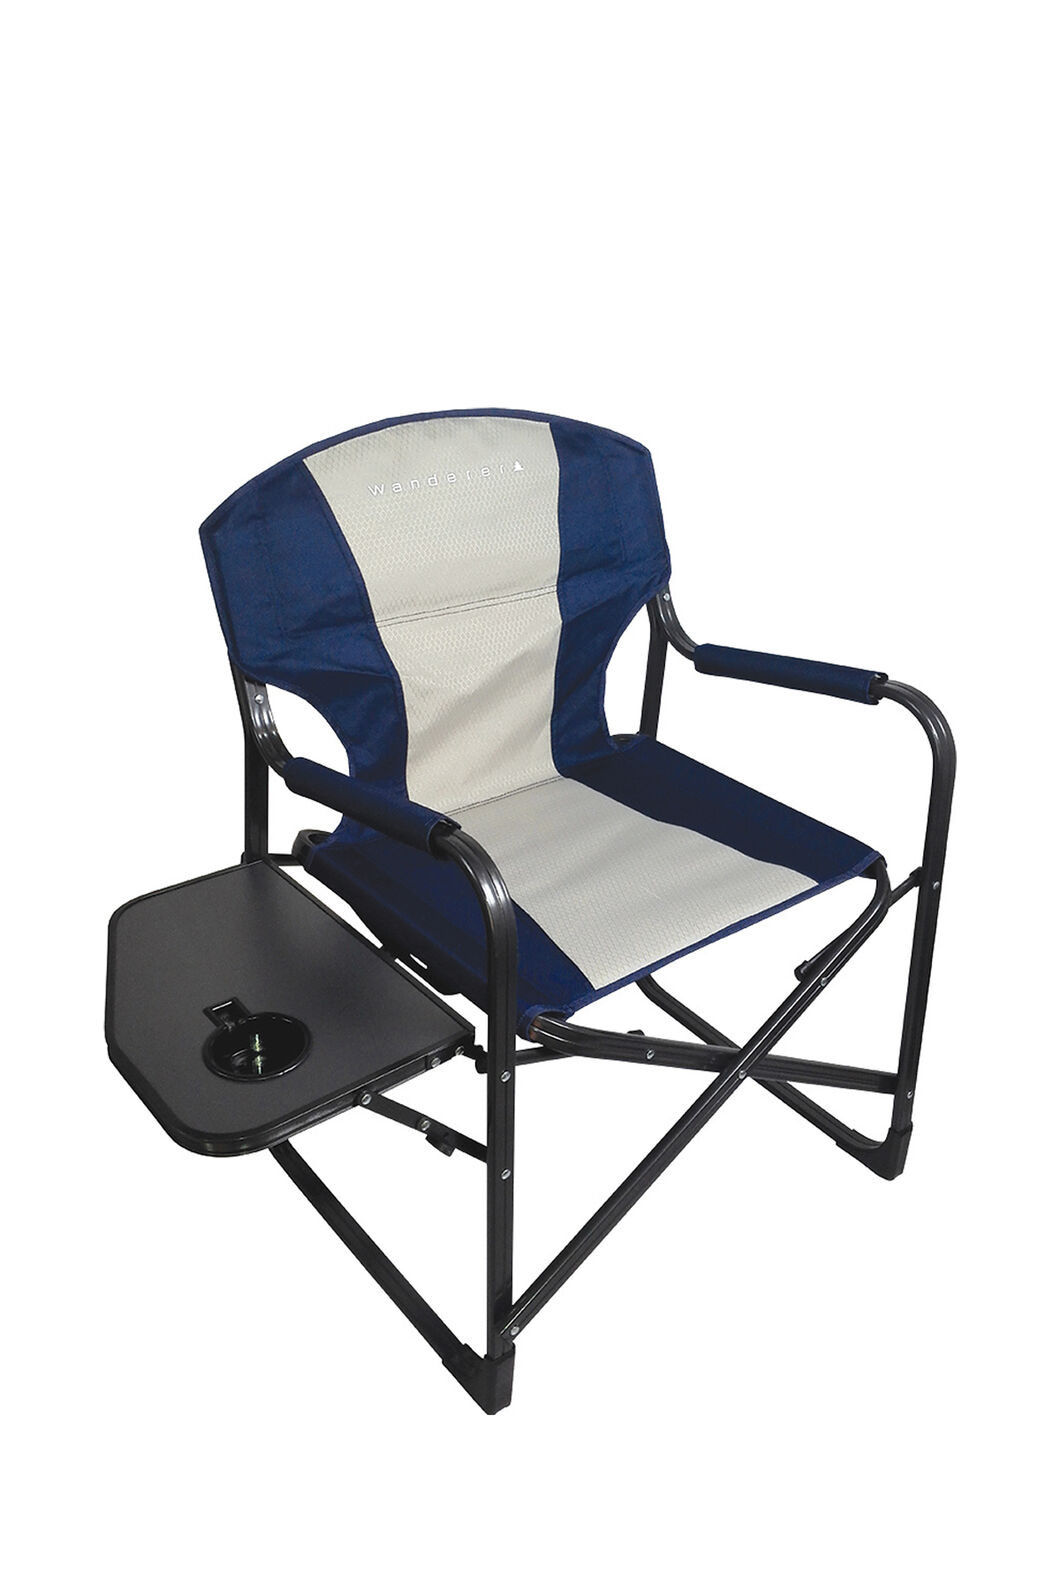 Wanderer Directors Chair With Side Table Macpac